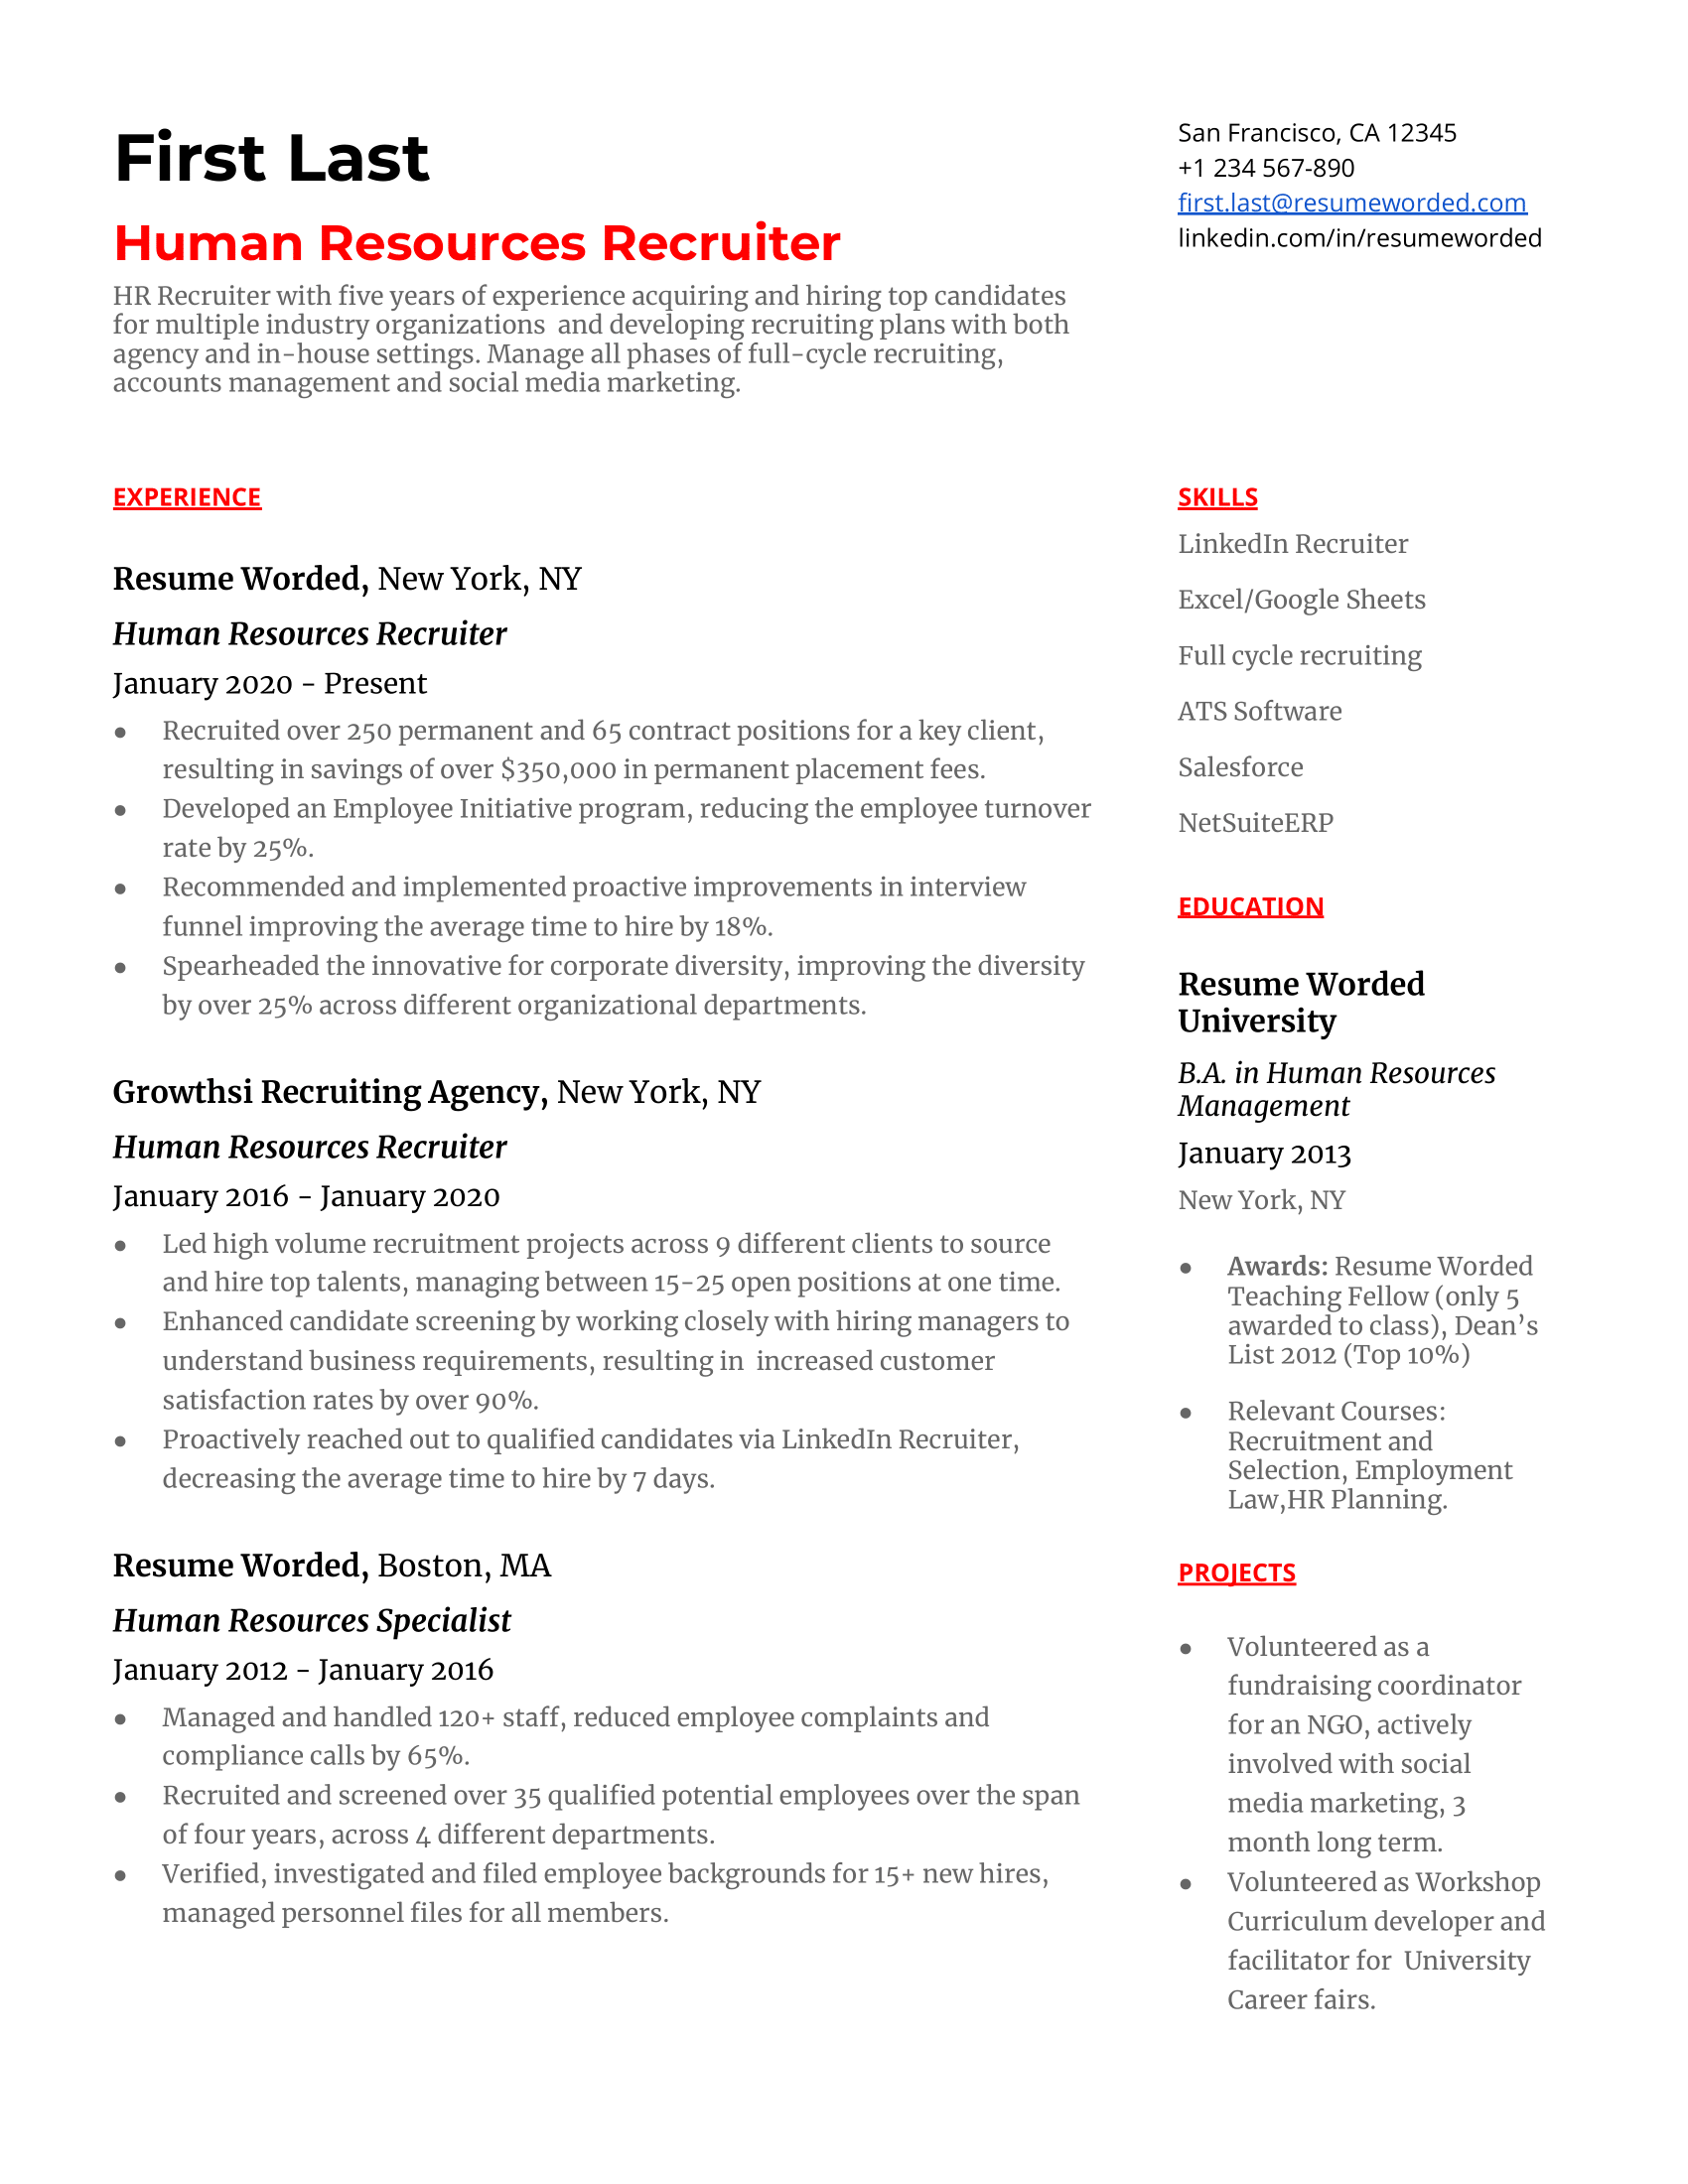 Human Resources (HR) Recruiter Resume Template + Example